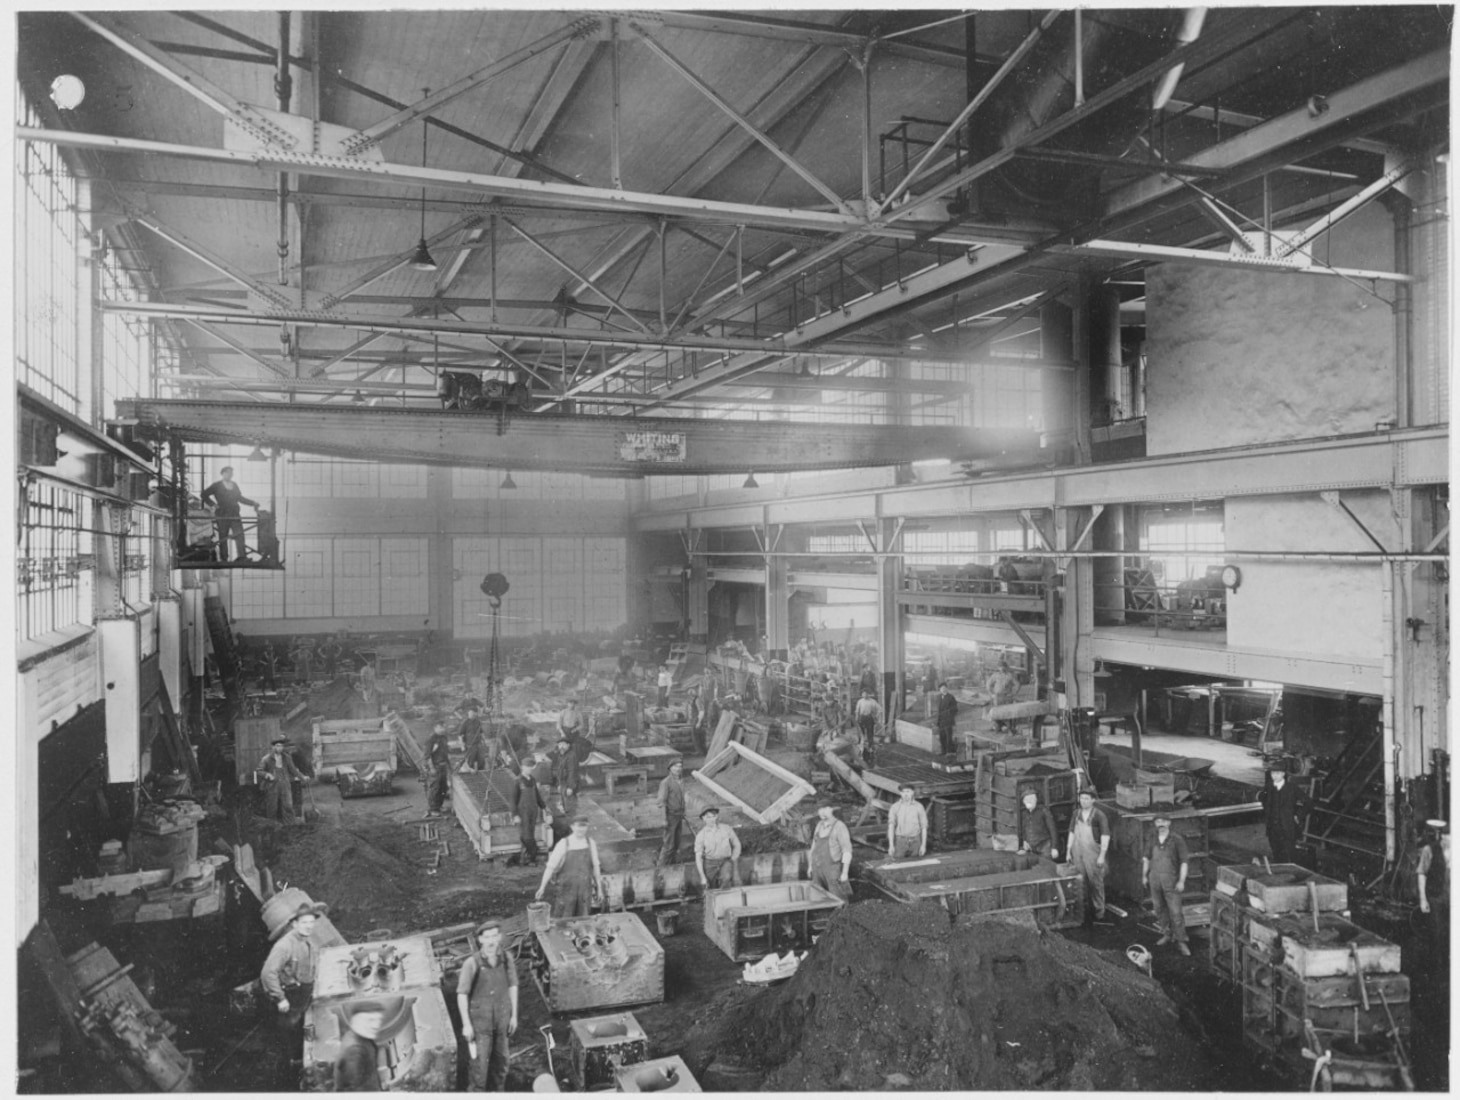 Steel and Iron Foundry, New London Ship and Engine Company, Groton, Connecticut. U.S. Naval History and Heritage Command Photograph.